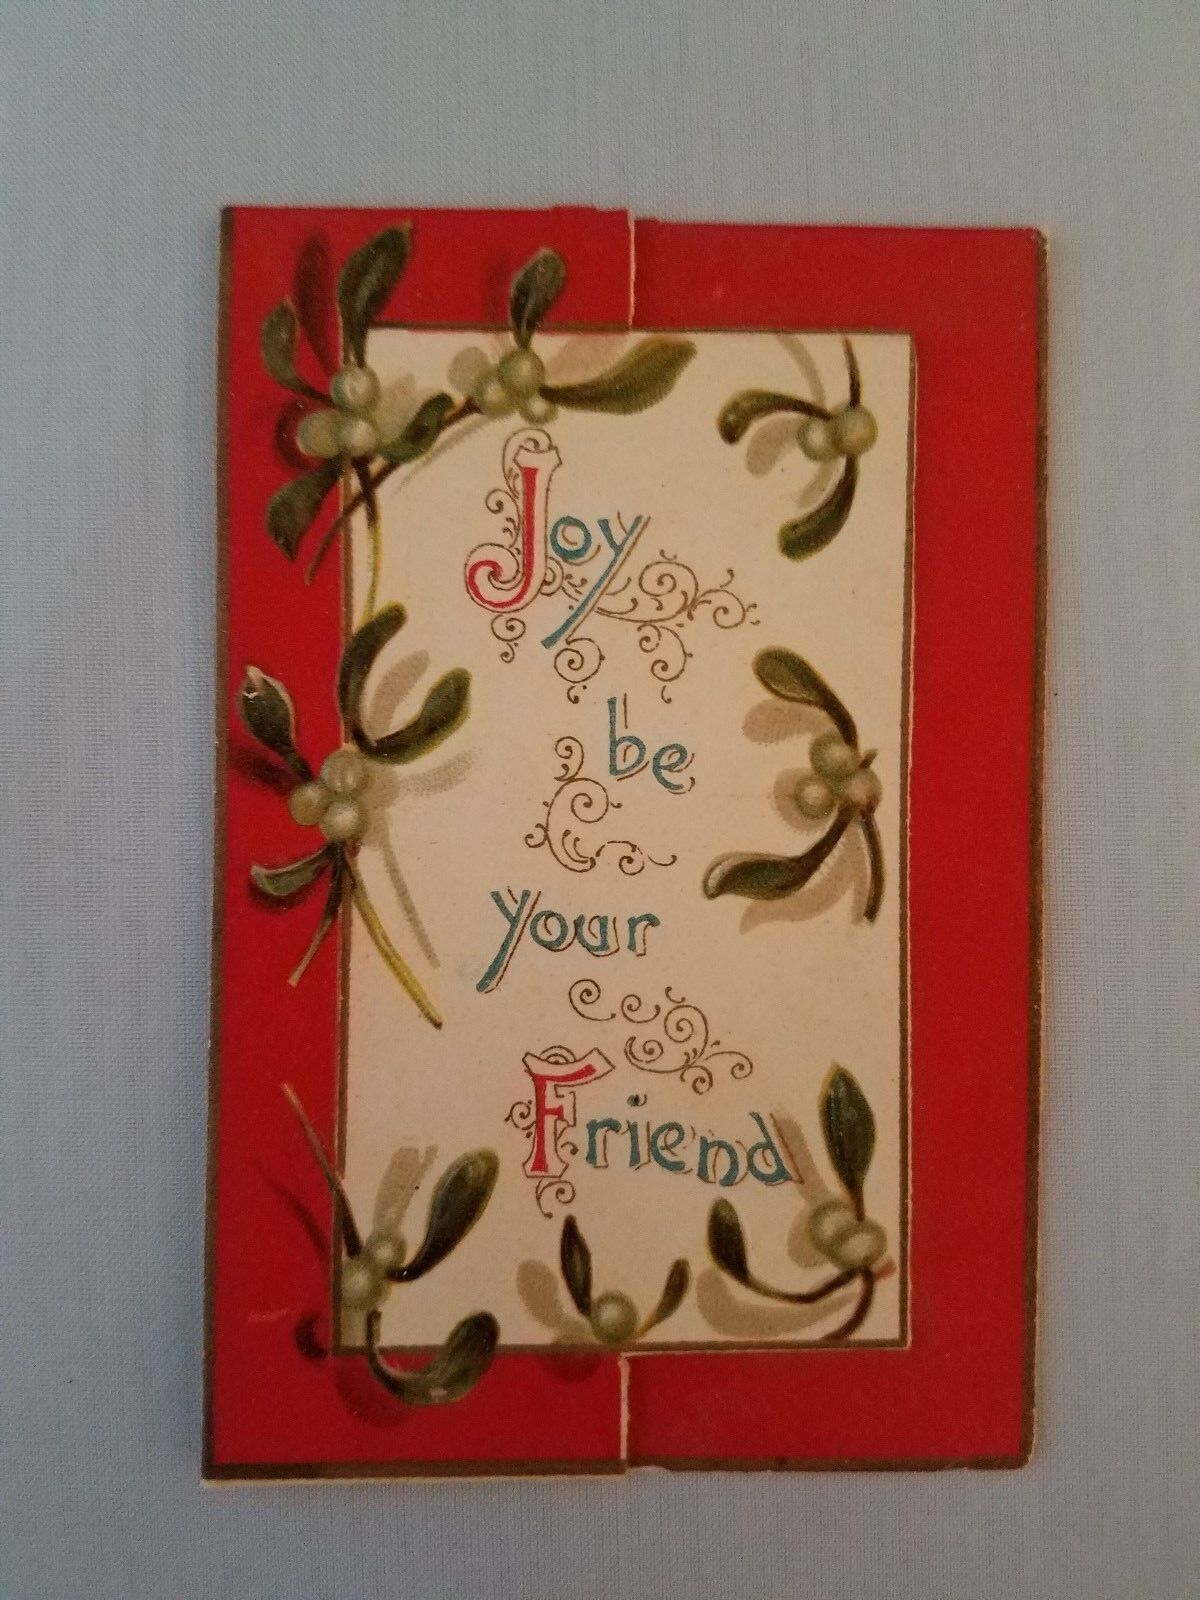 Vintage Small Christmas Card  'Joy to be your Friend'